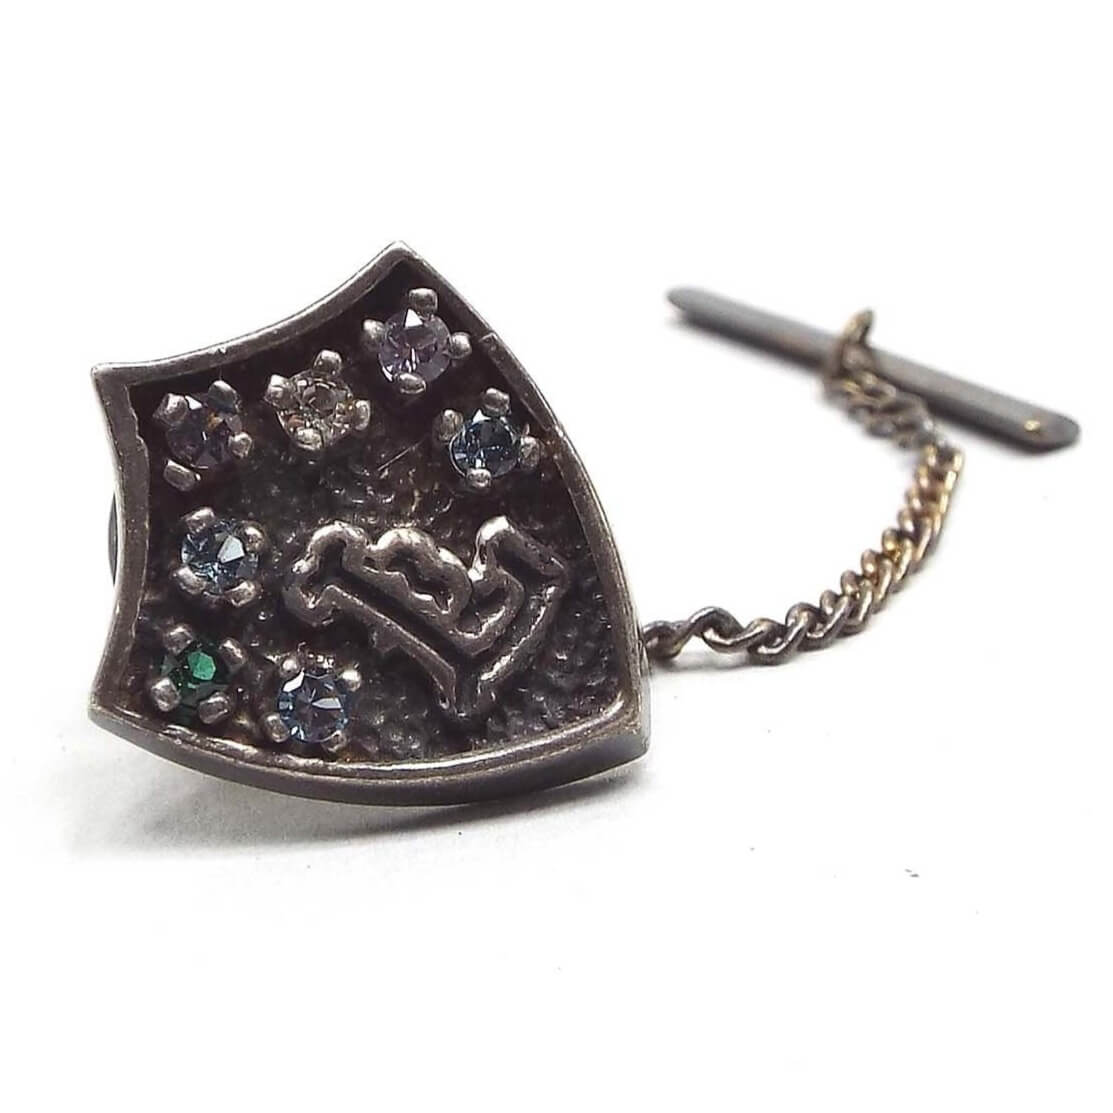 Initial Letter L Vintage Tie Tack with Gemstone Chips, Shield Shaped Tie Pin